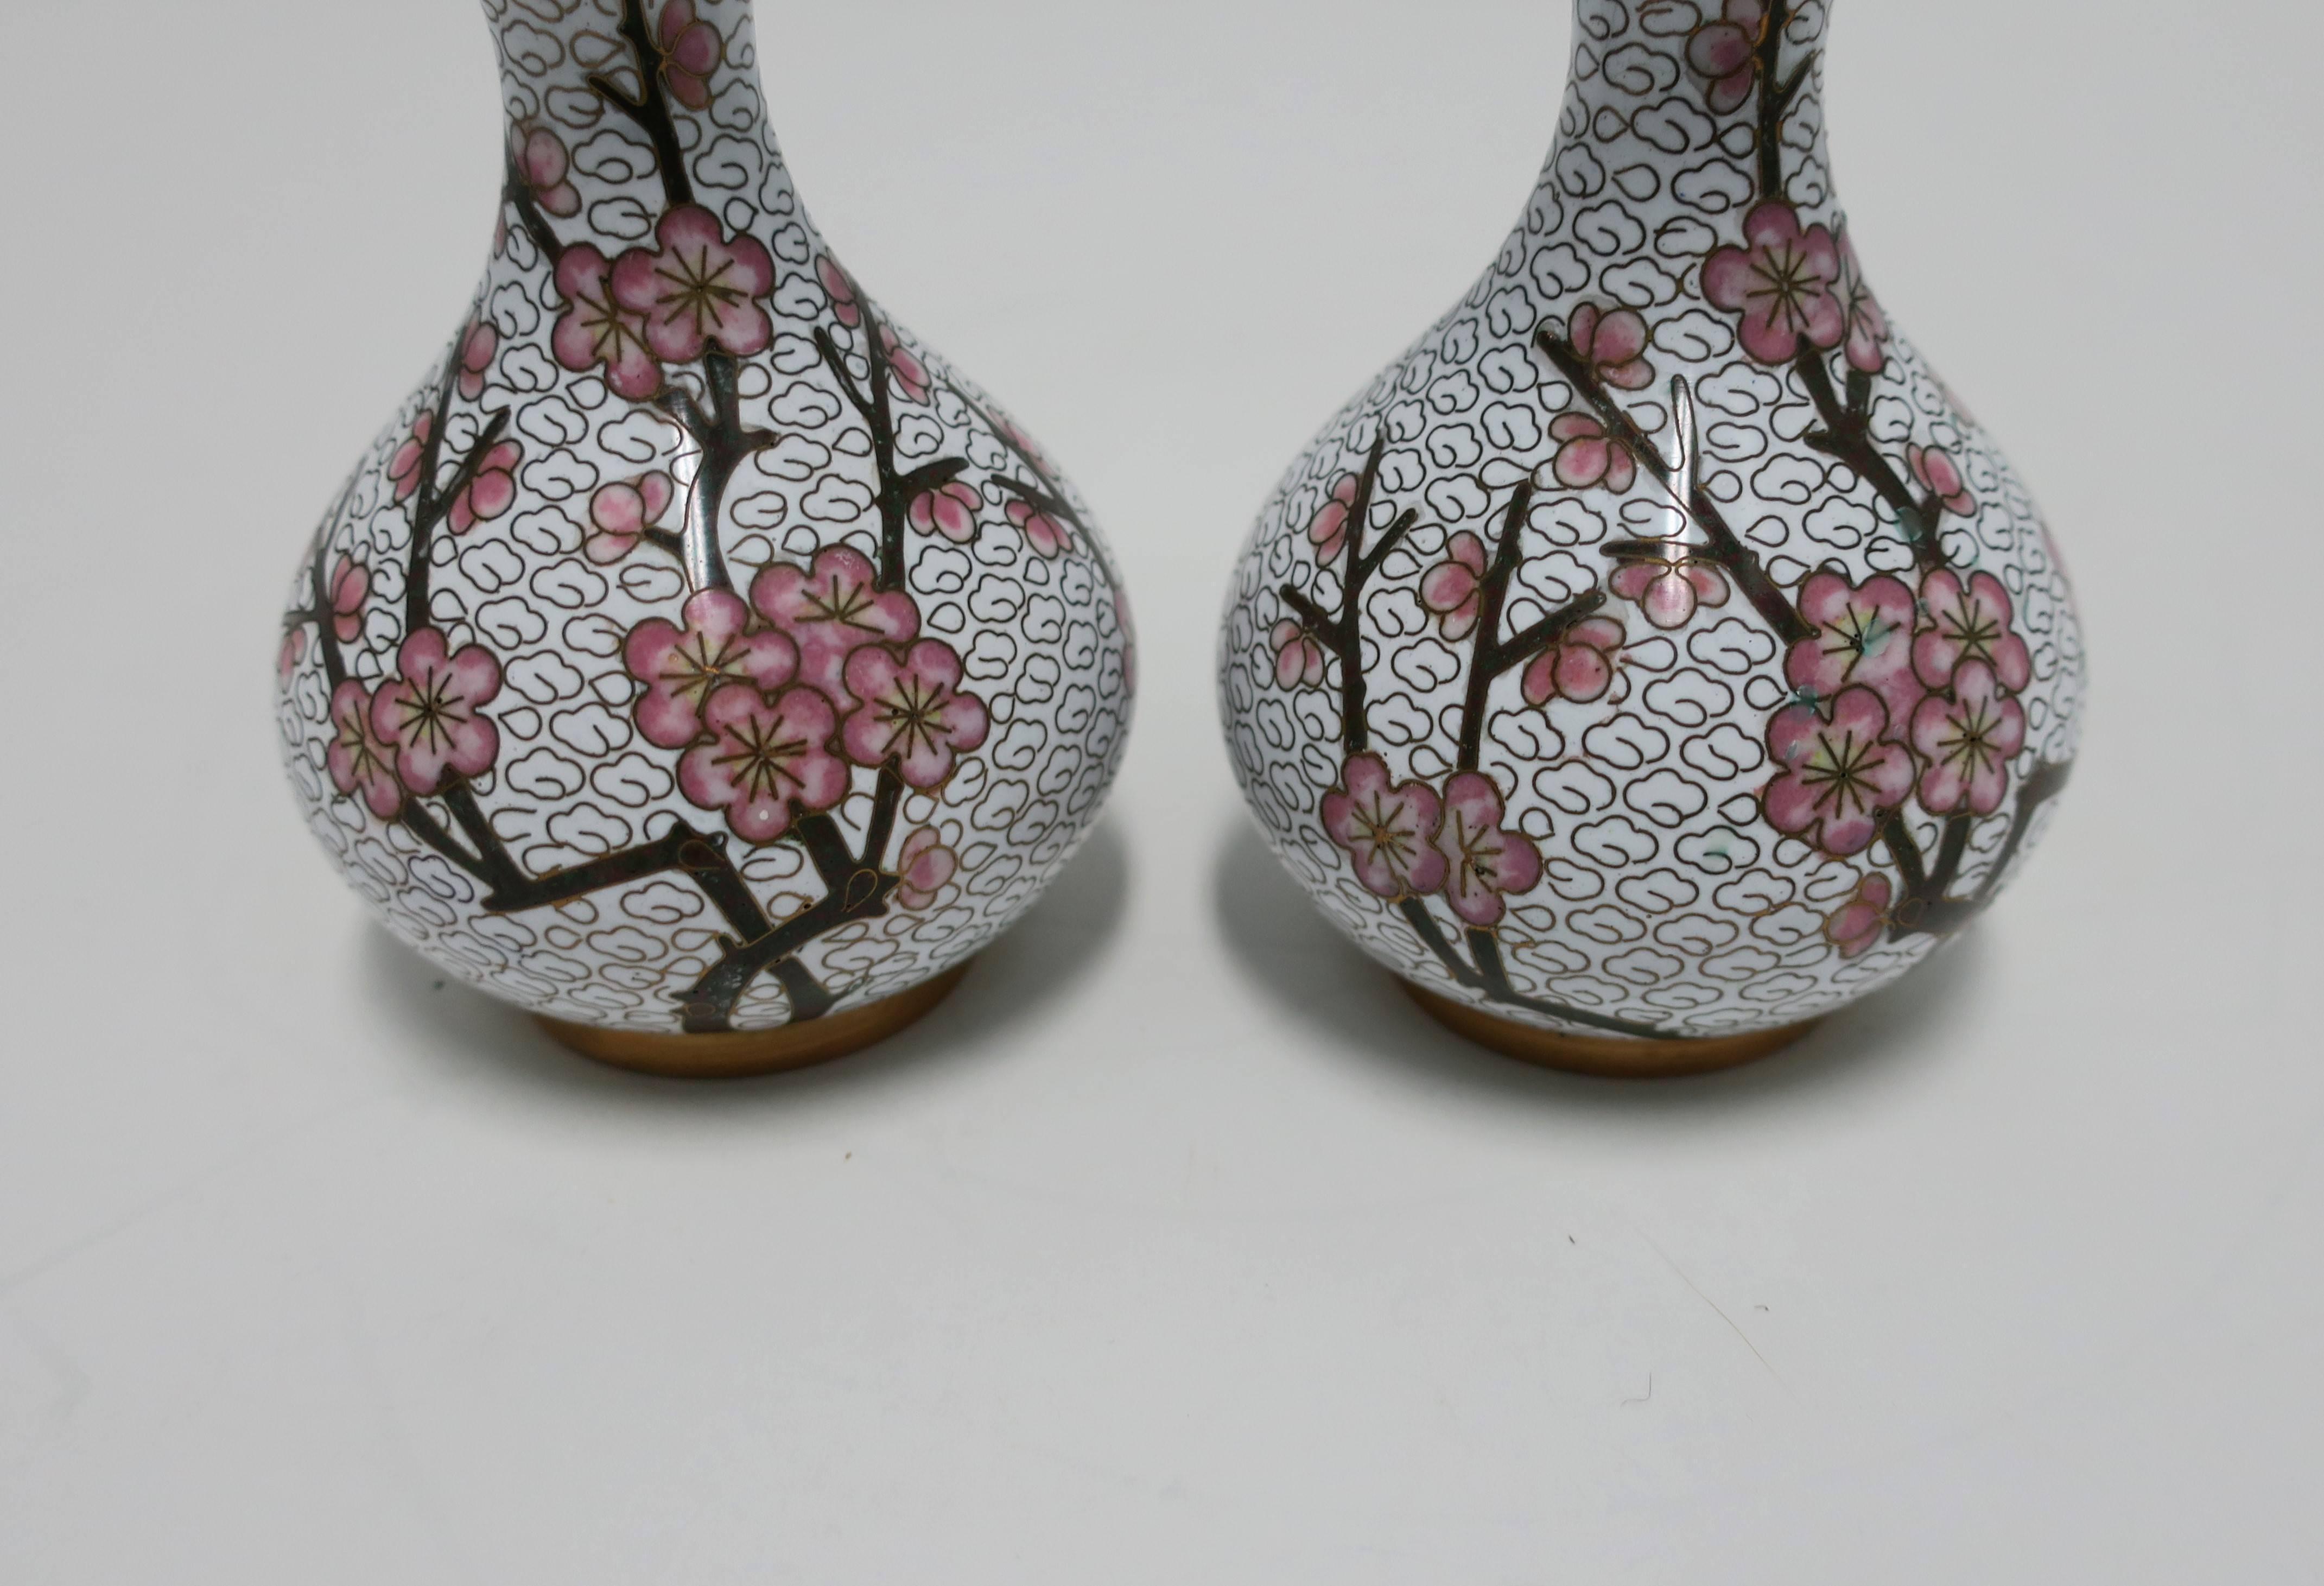 White and Pink Cloisonné Enamel Brass Vases with Cherry Blossom Design, Pair For Sale 4